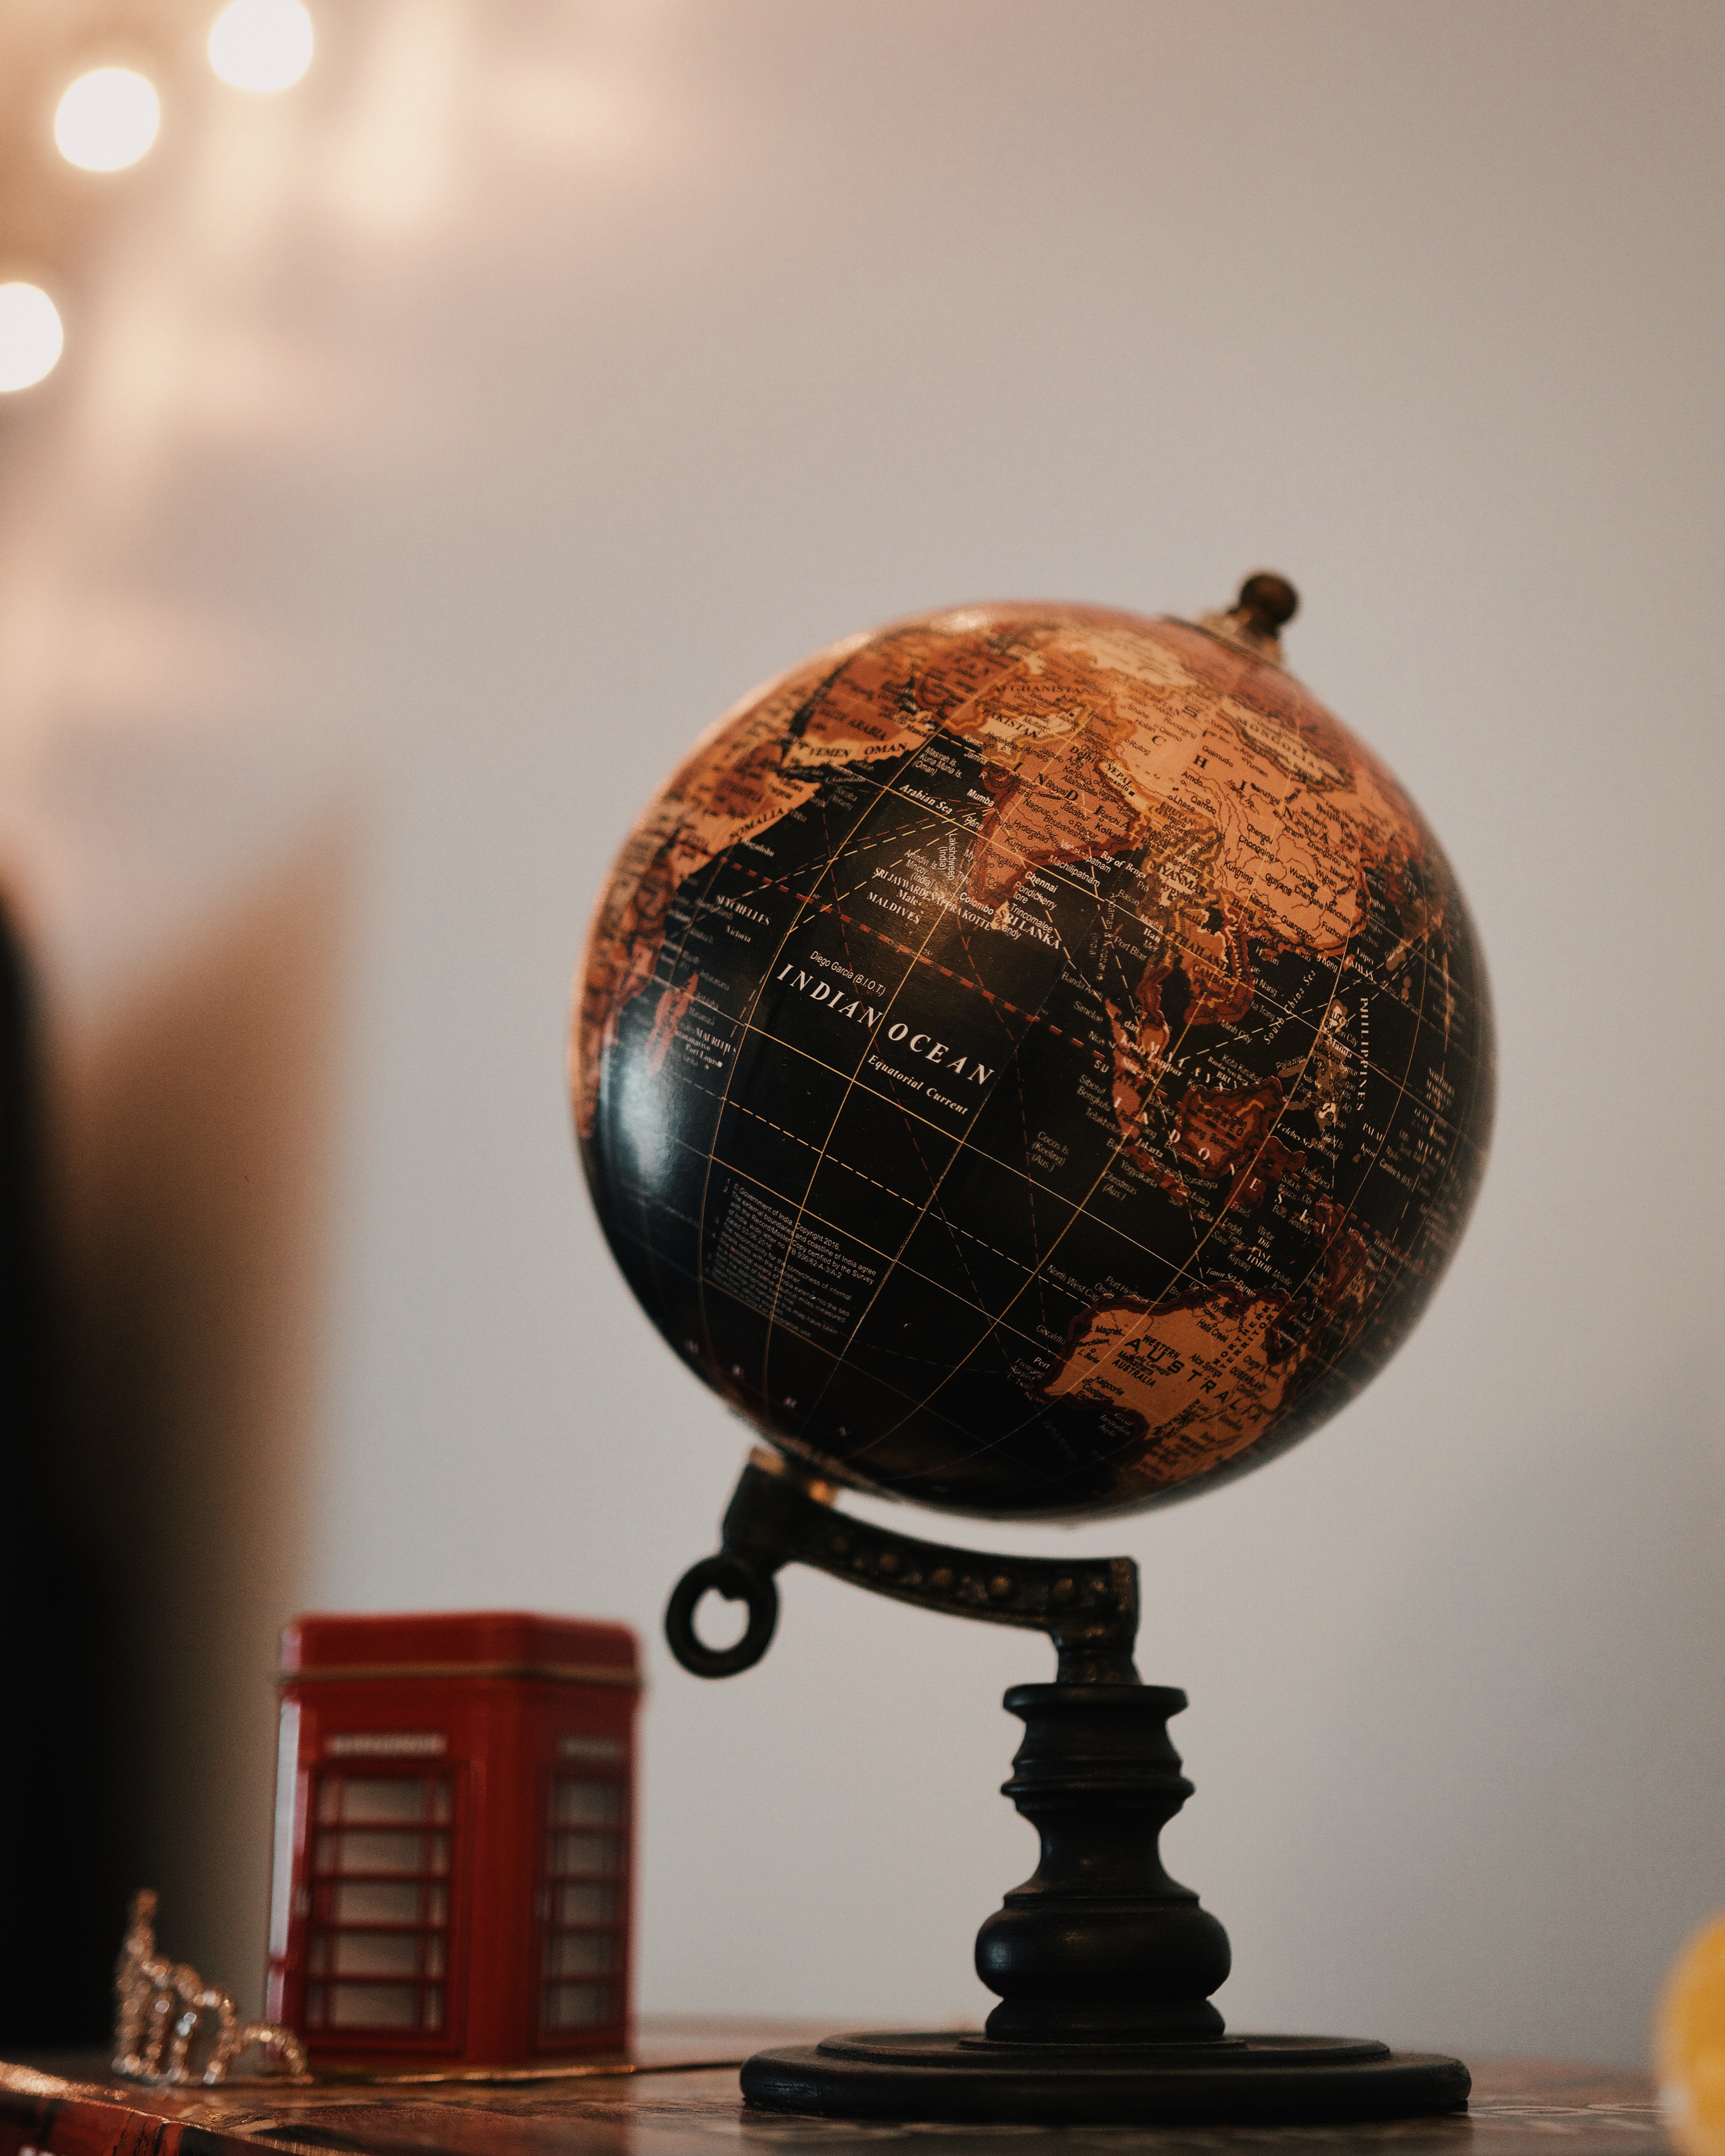 miscellanea, geography, miscellaneous, land, earth, ball, map, sphere, globe